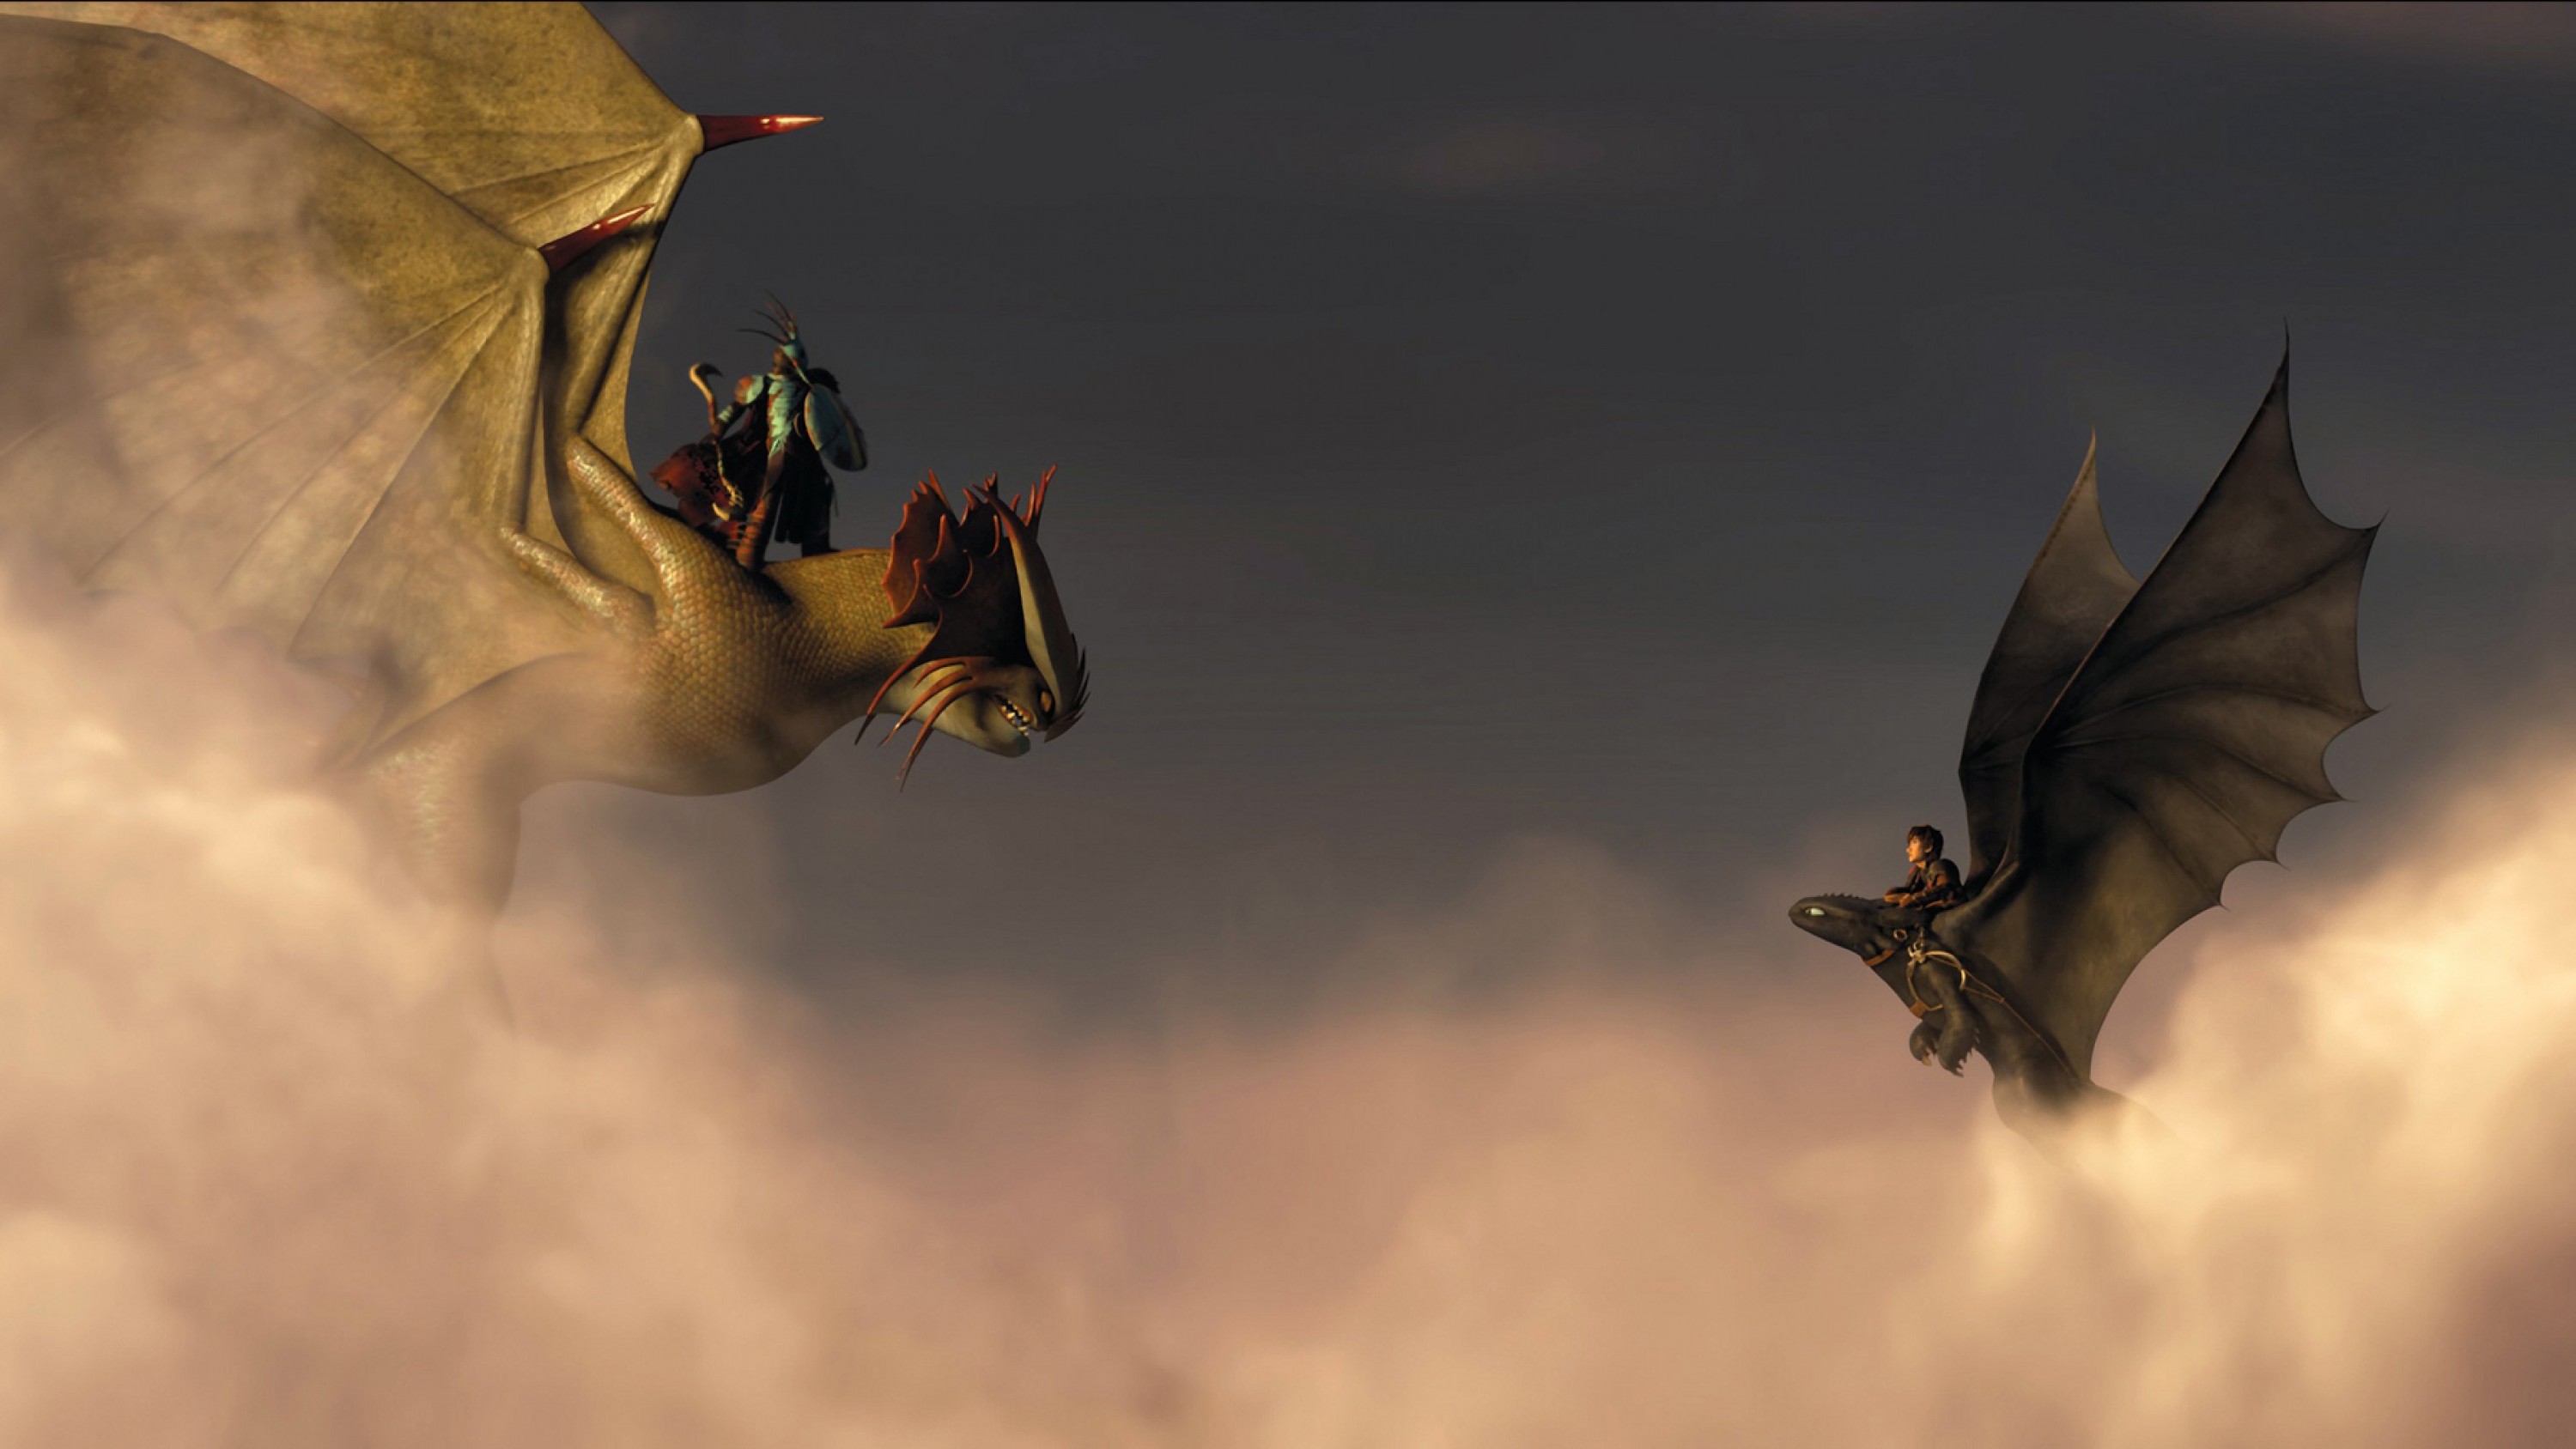 How to Train your Dragon 2 - First 5 Minutes and Dragon Race